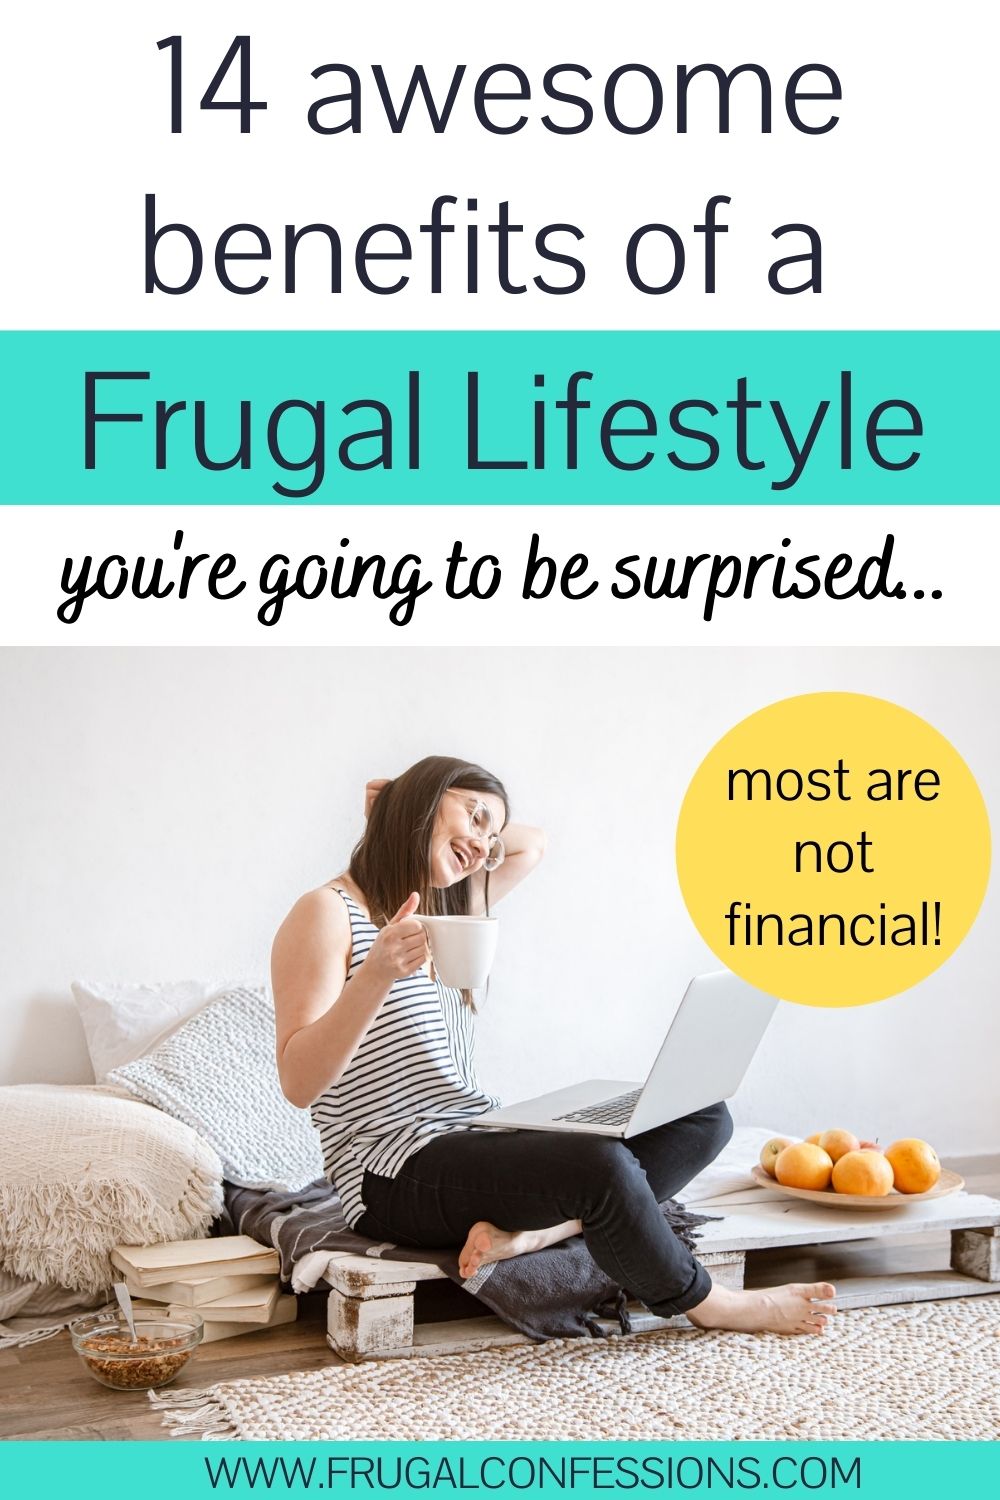 woman on pallet bed, smiling, looking at laptop, text overlay "14 benefits of a frugal lifestyle"